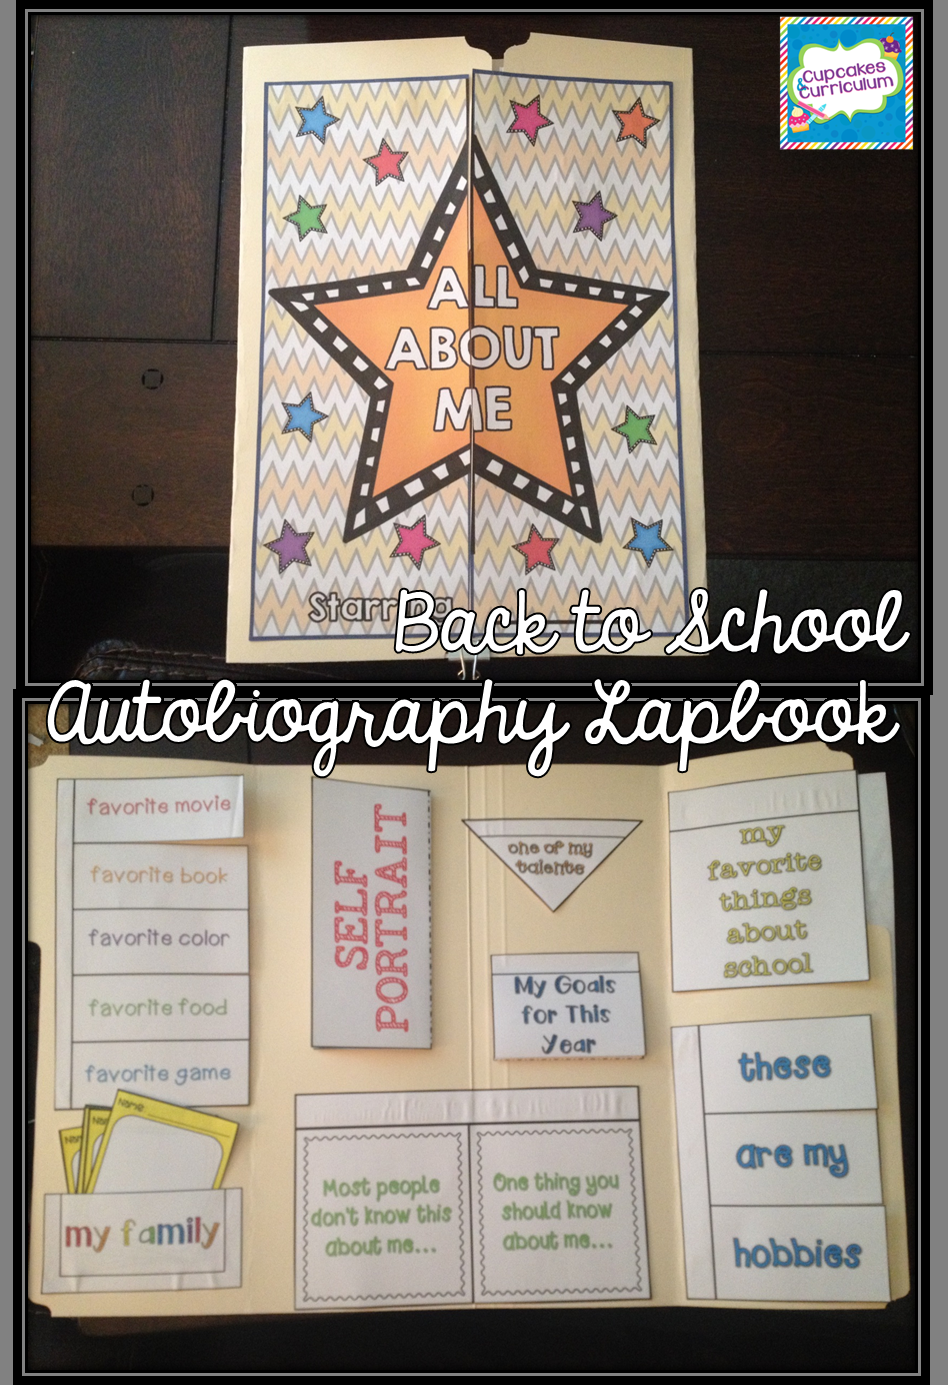 All About Me Audiobiography Lapbook